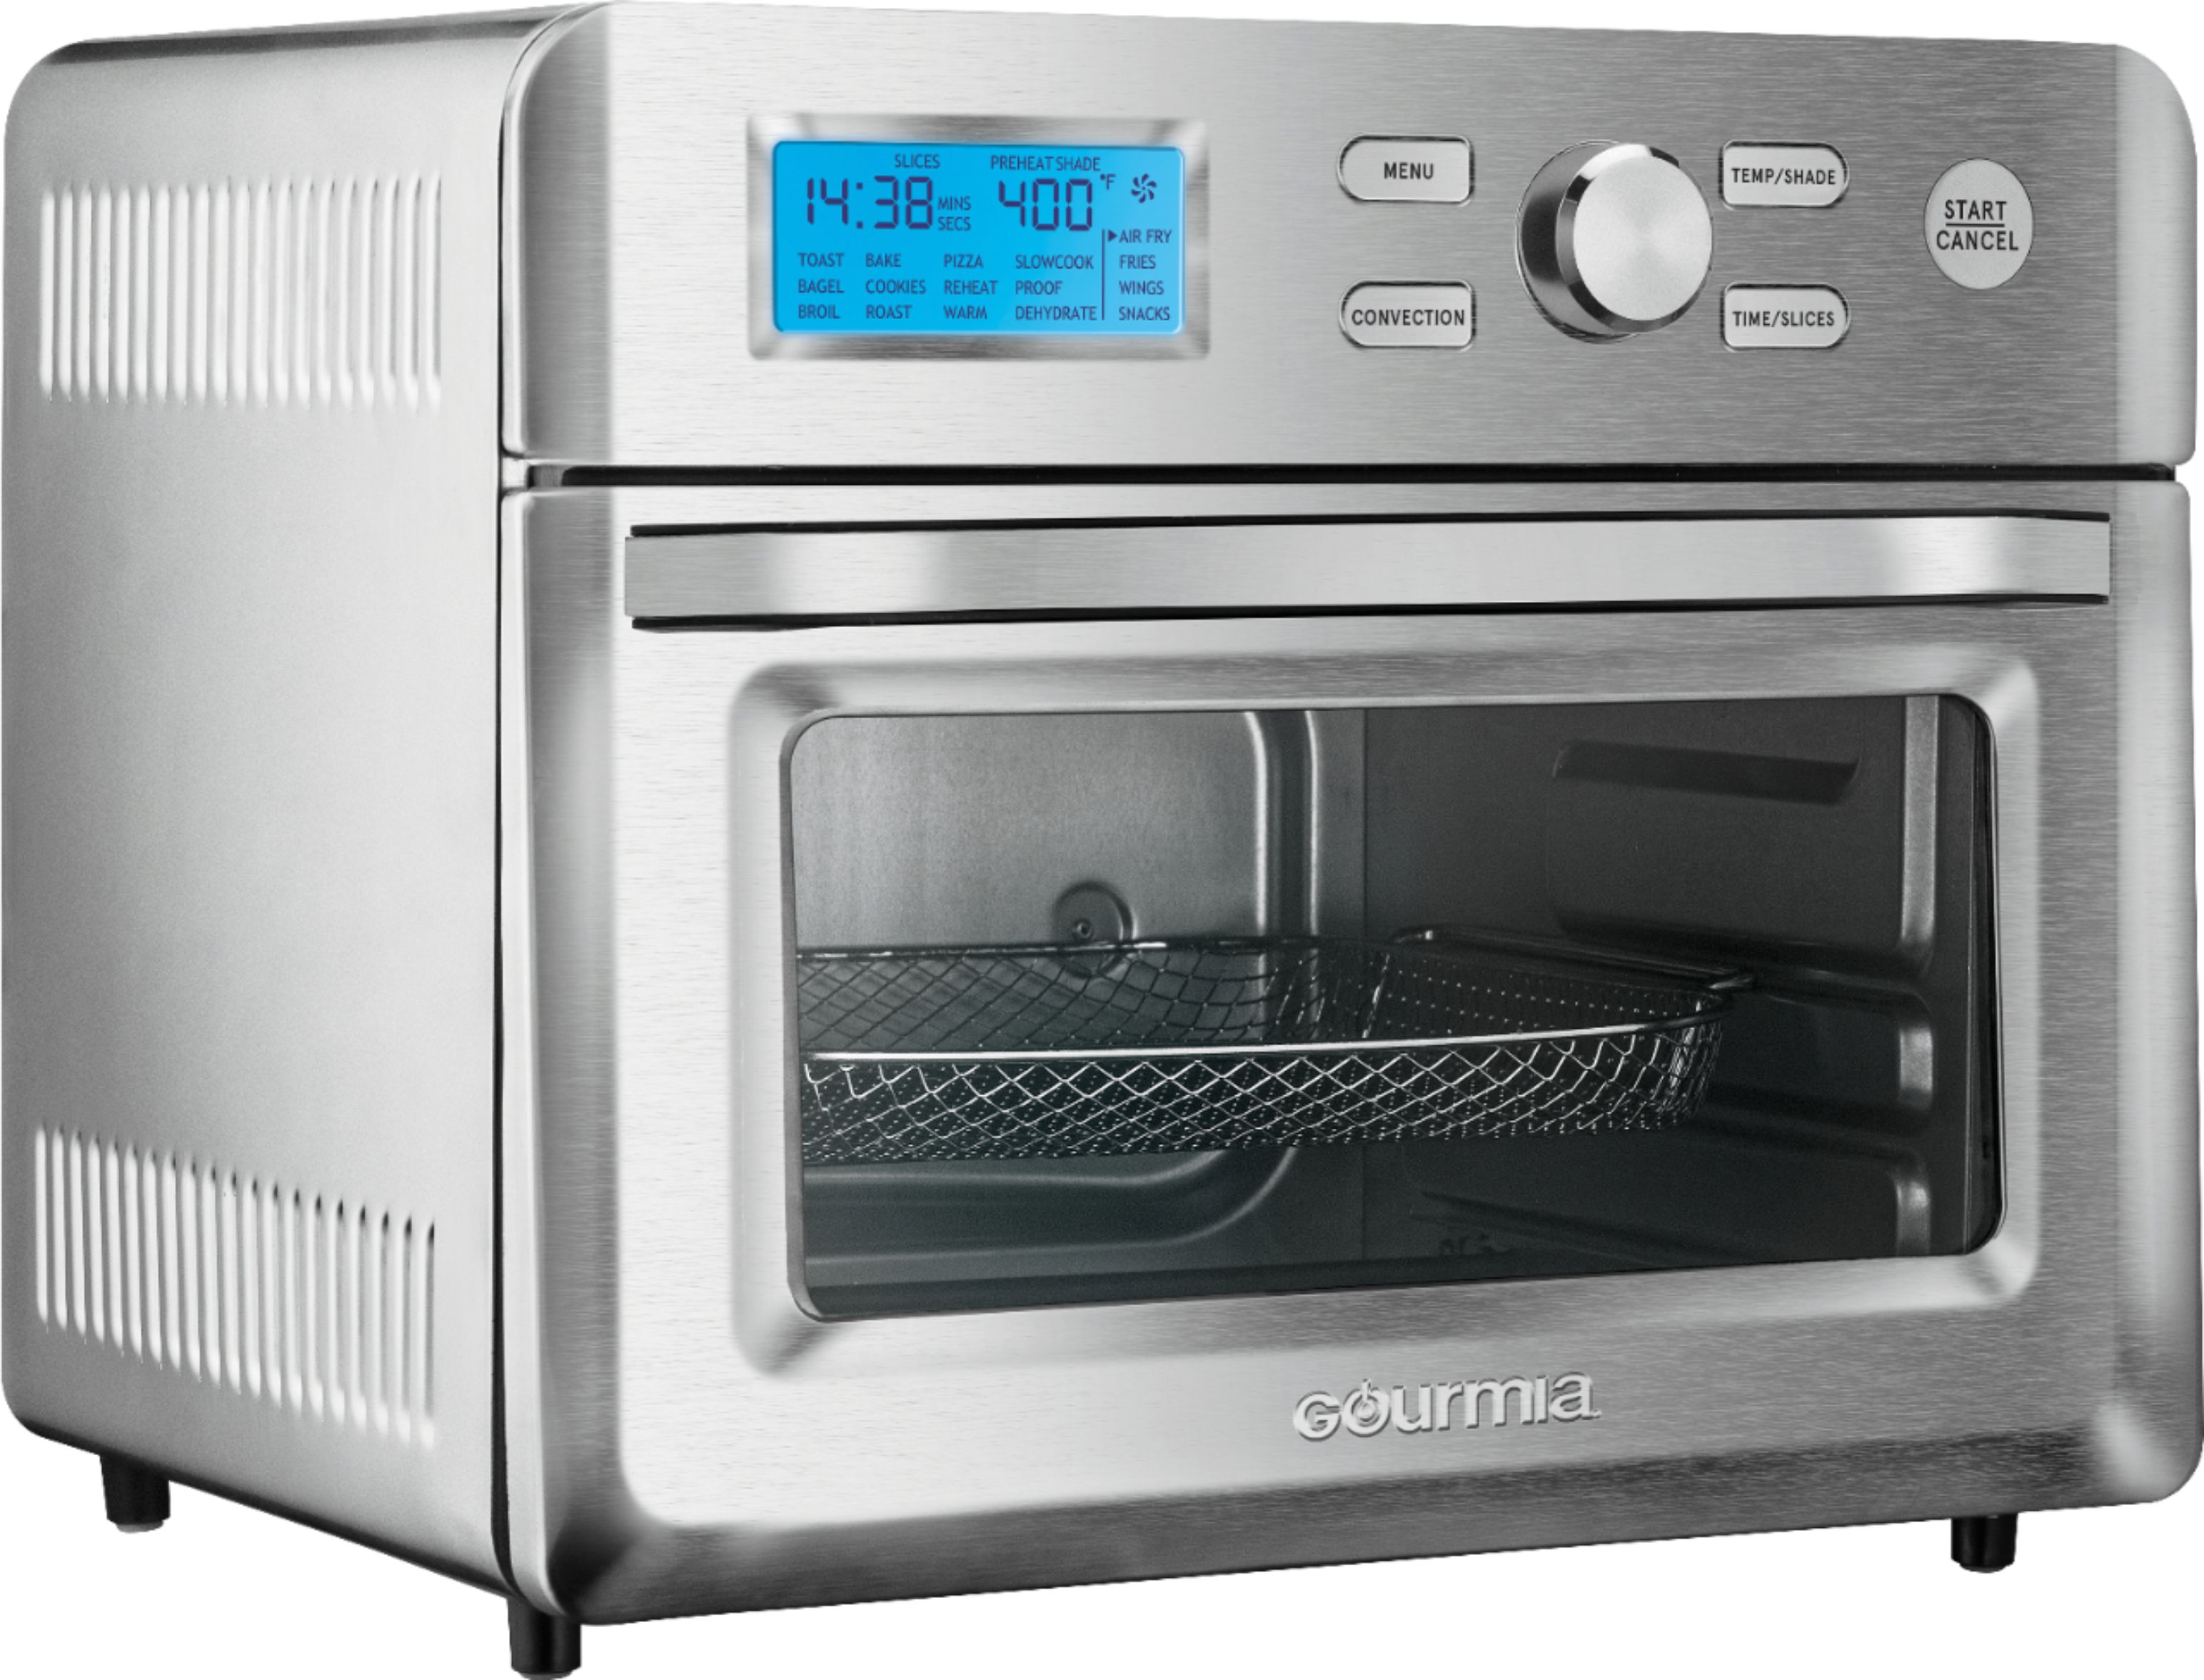 Gourmia Digital Stainless Steel Toaster Oven Air Fryer – Stainless